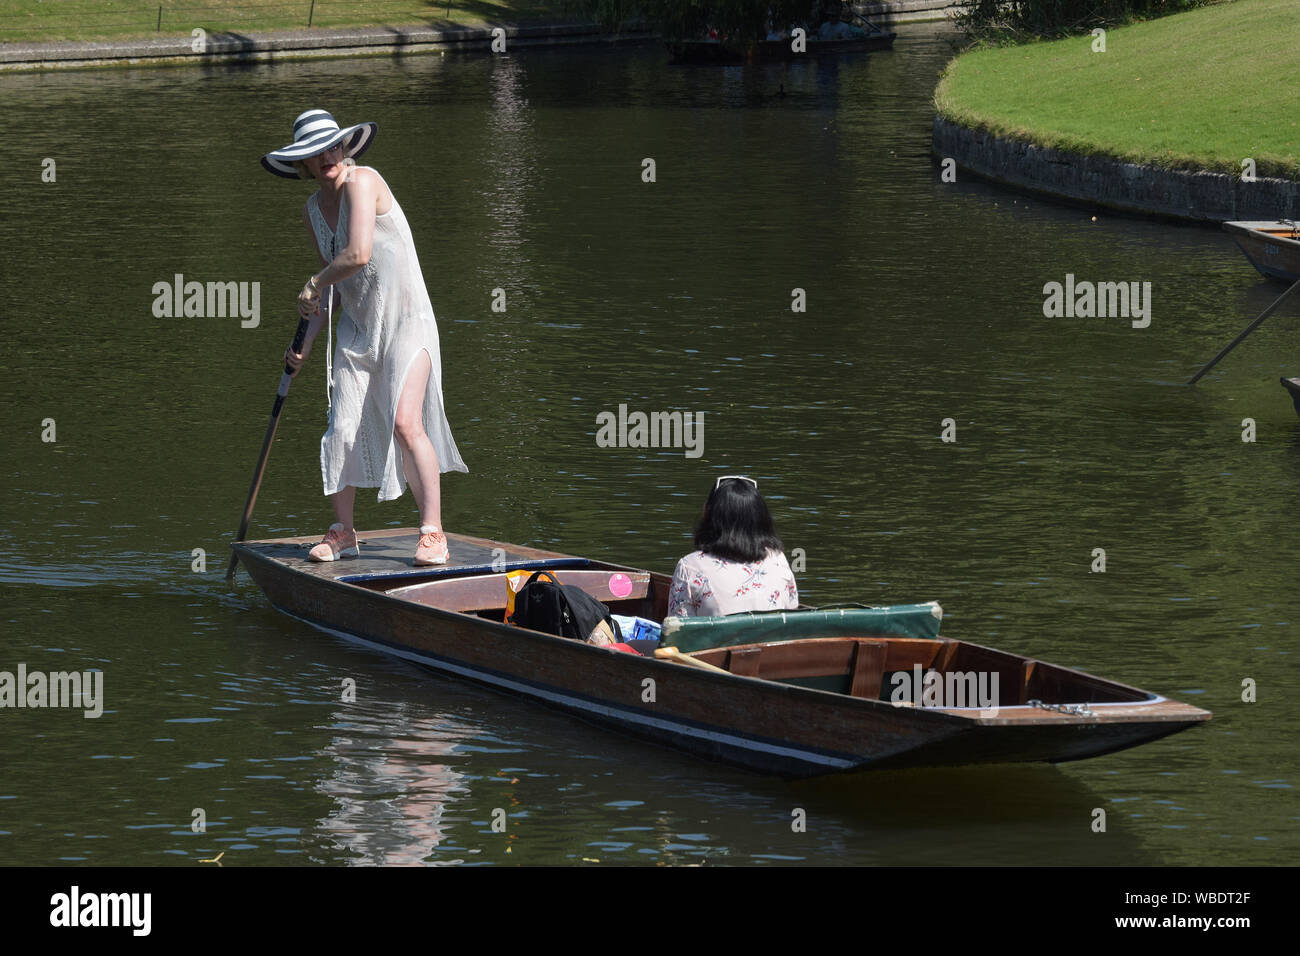 With record breaking August Bank Holiday temperatures visitors to Cambridge enjoy the weather by enjoying the river Cam in boats and Punts. Cambridge Stock Photo